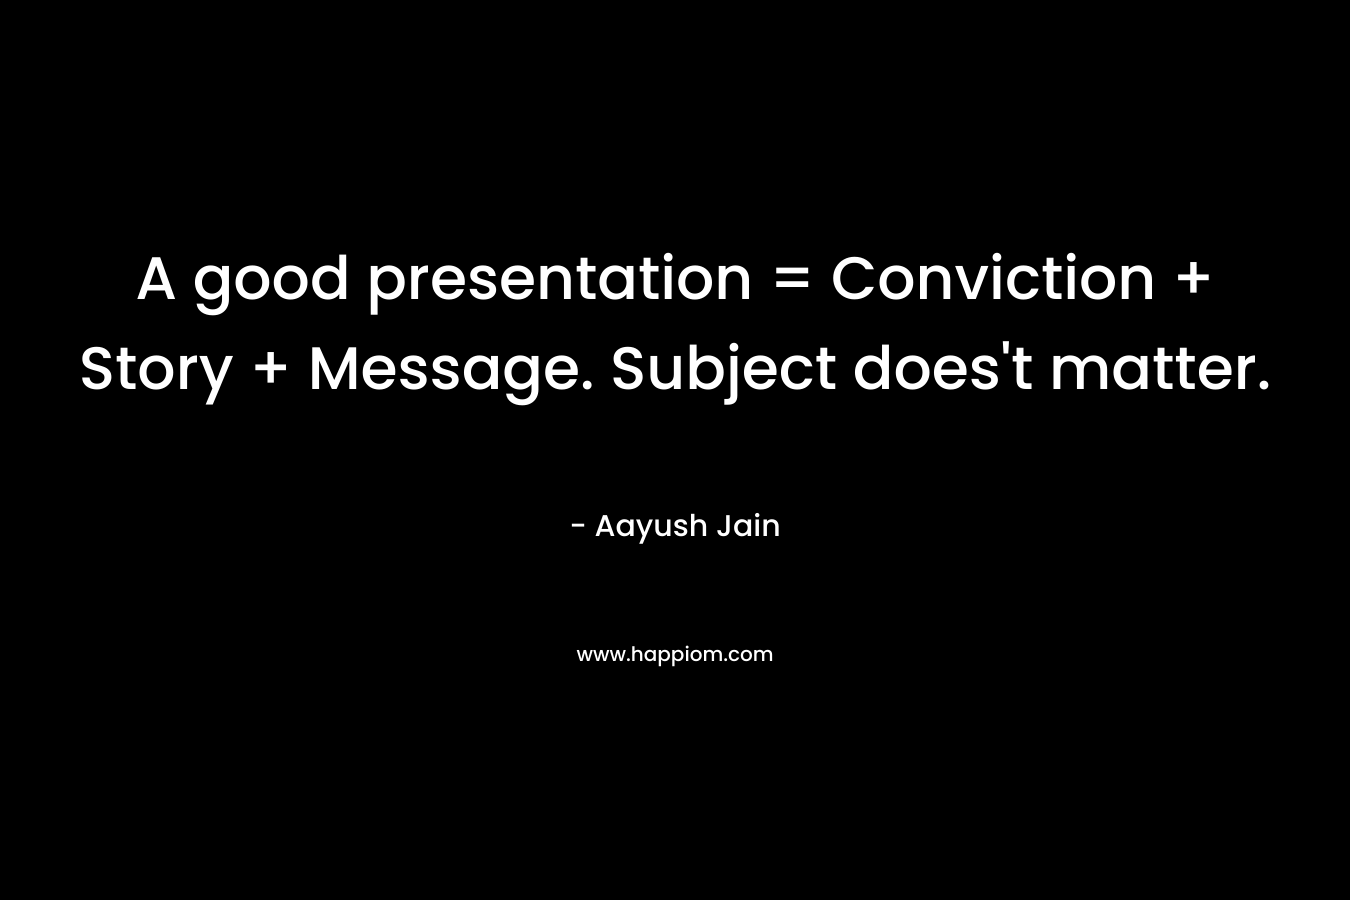 A good presentation = Conviction + Story + Message. Subject does't matter.